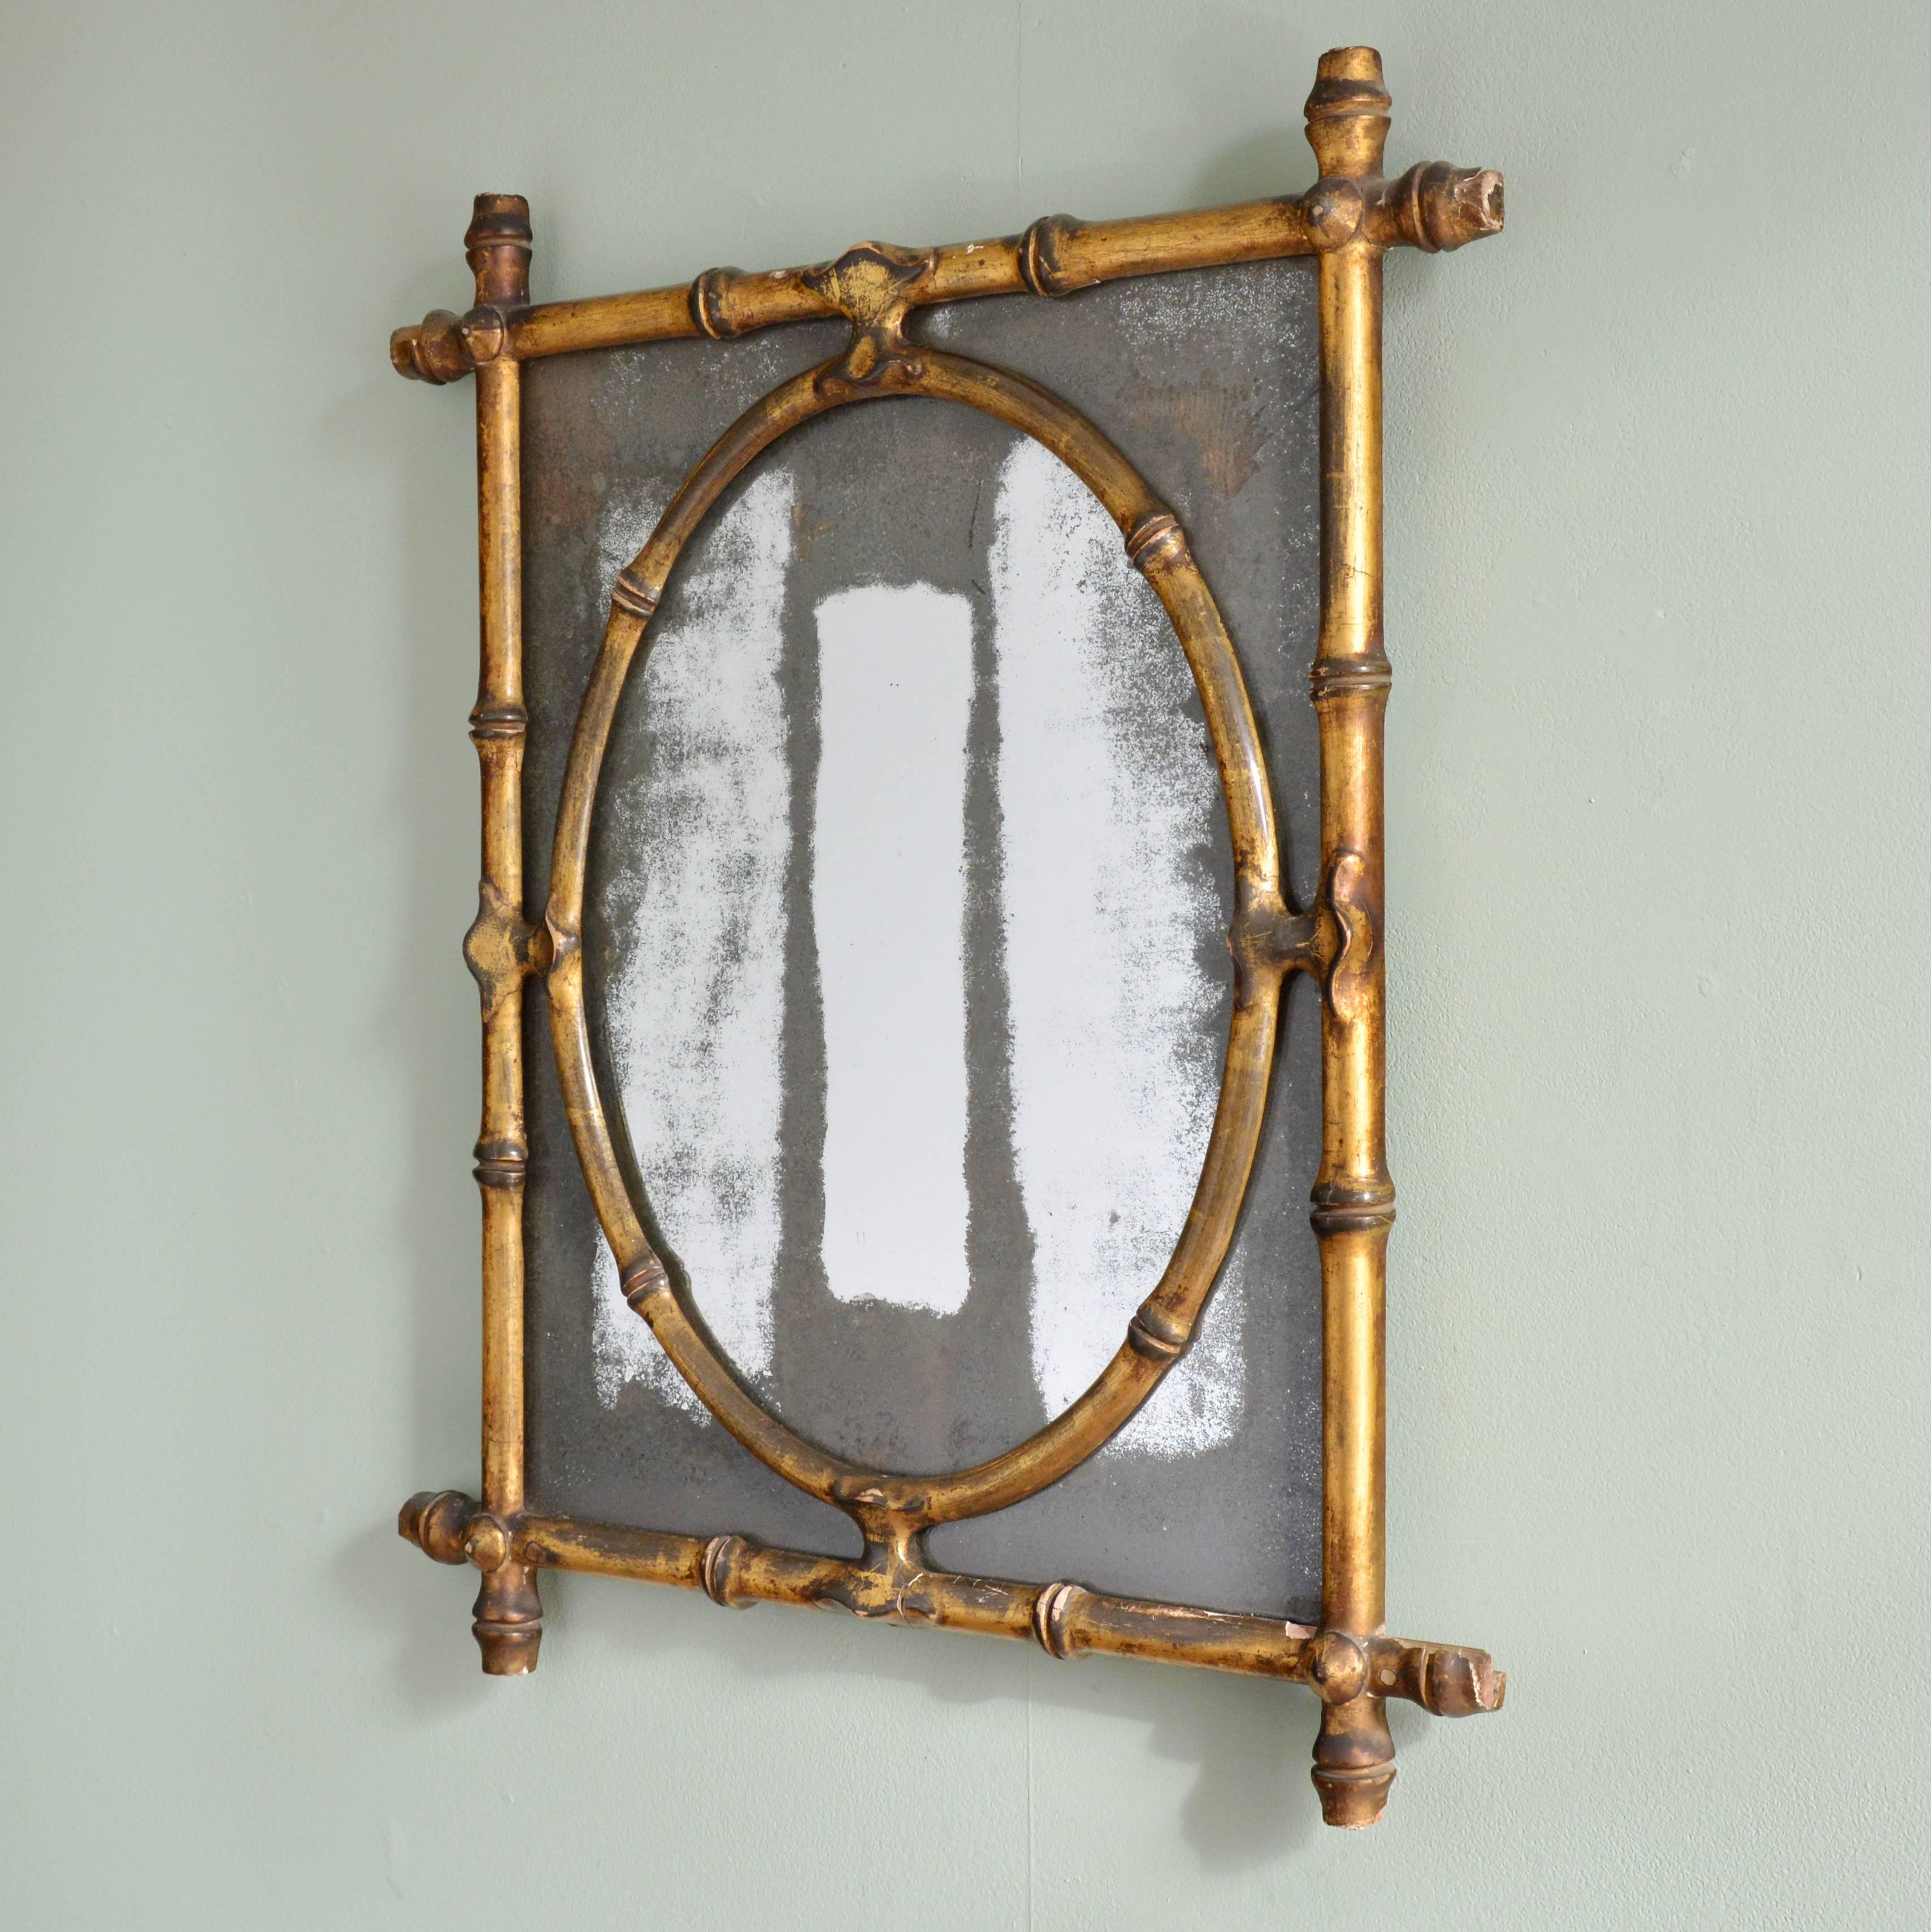 An early 19th century faux bamboo wall mirror, gilt, original plate glass.

Available to view at Brunswick House, London.

Dimensions: 58cm (22¾